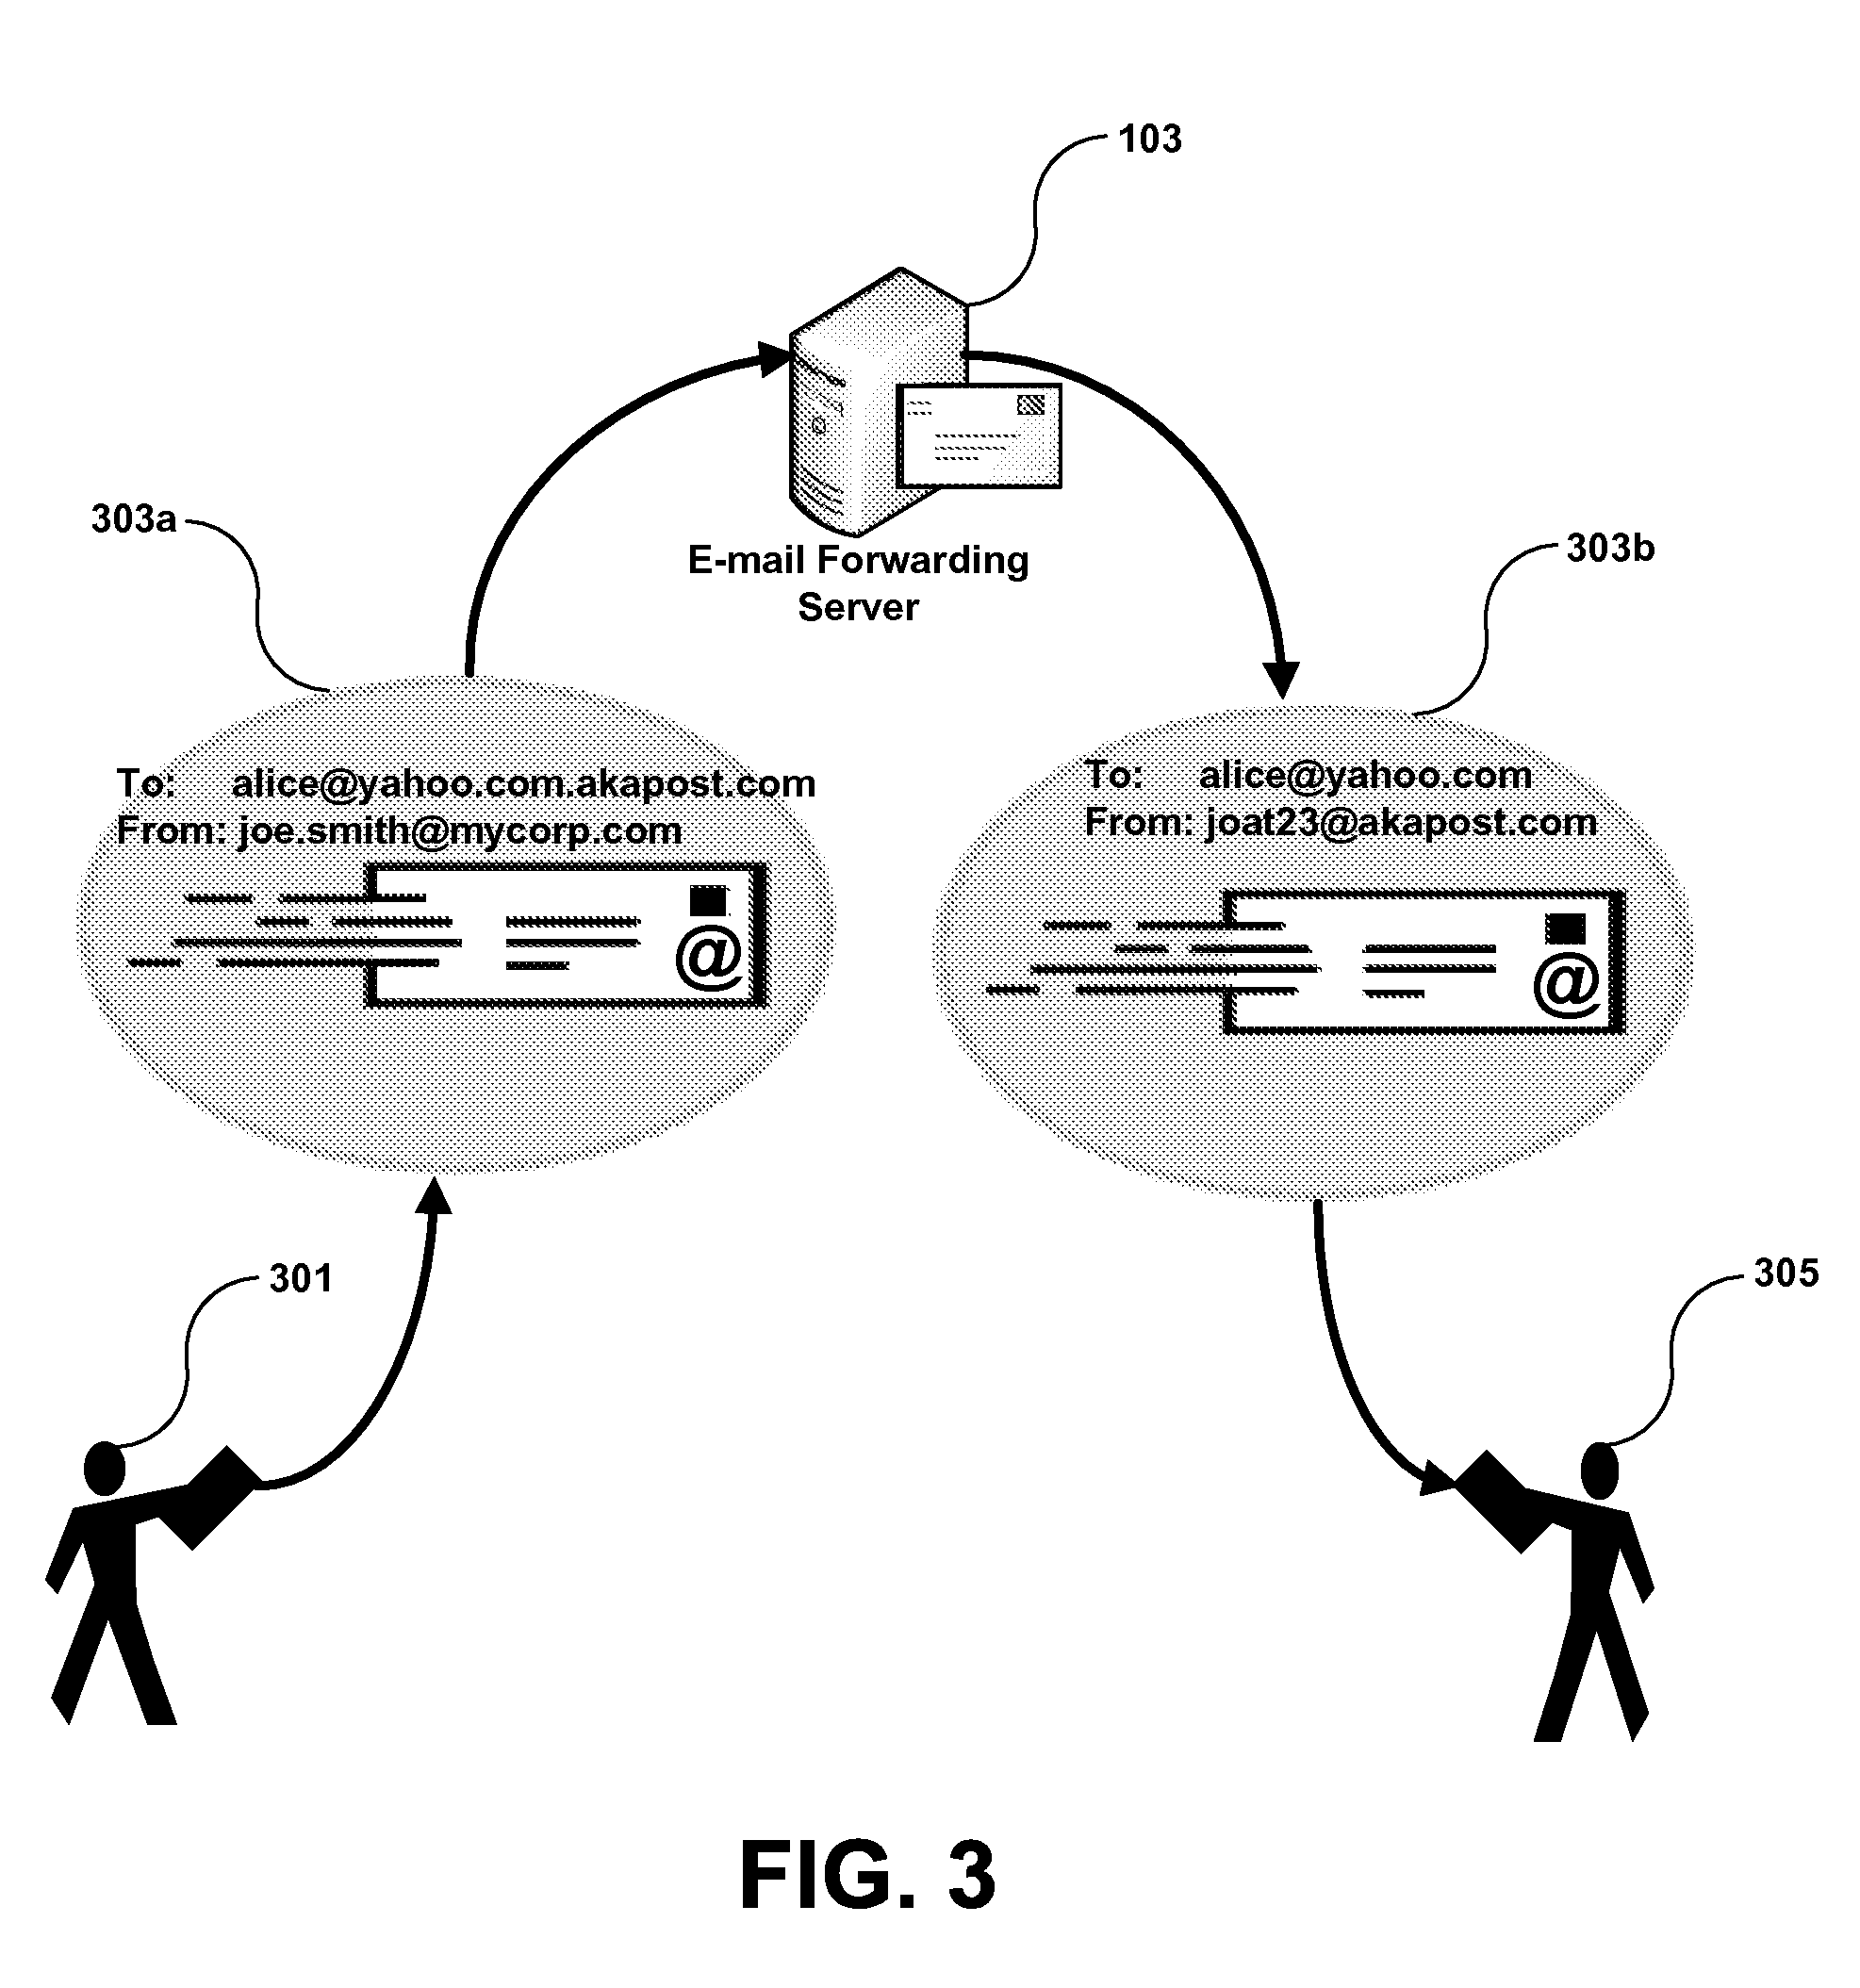 System and method for protecting e-mail sender identity via use of customized recipient e-mail addresses